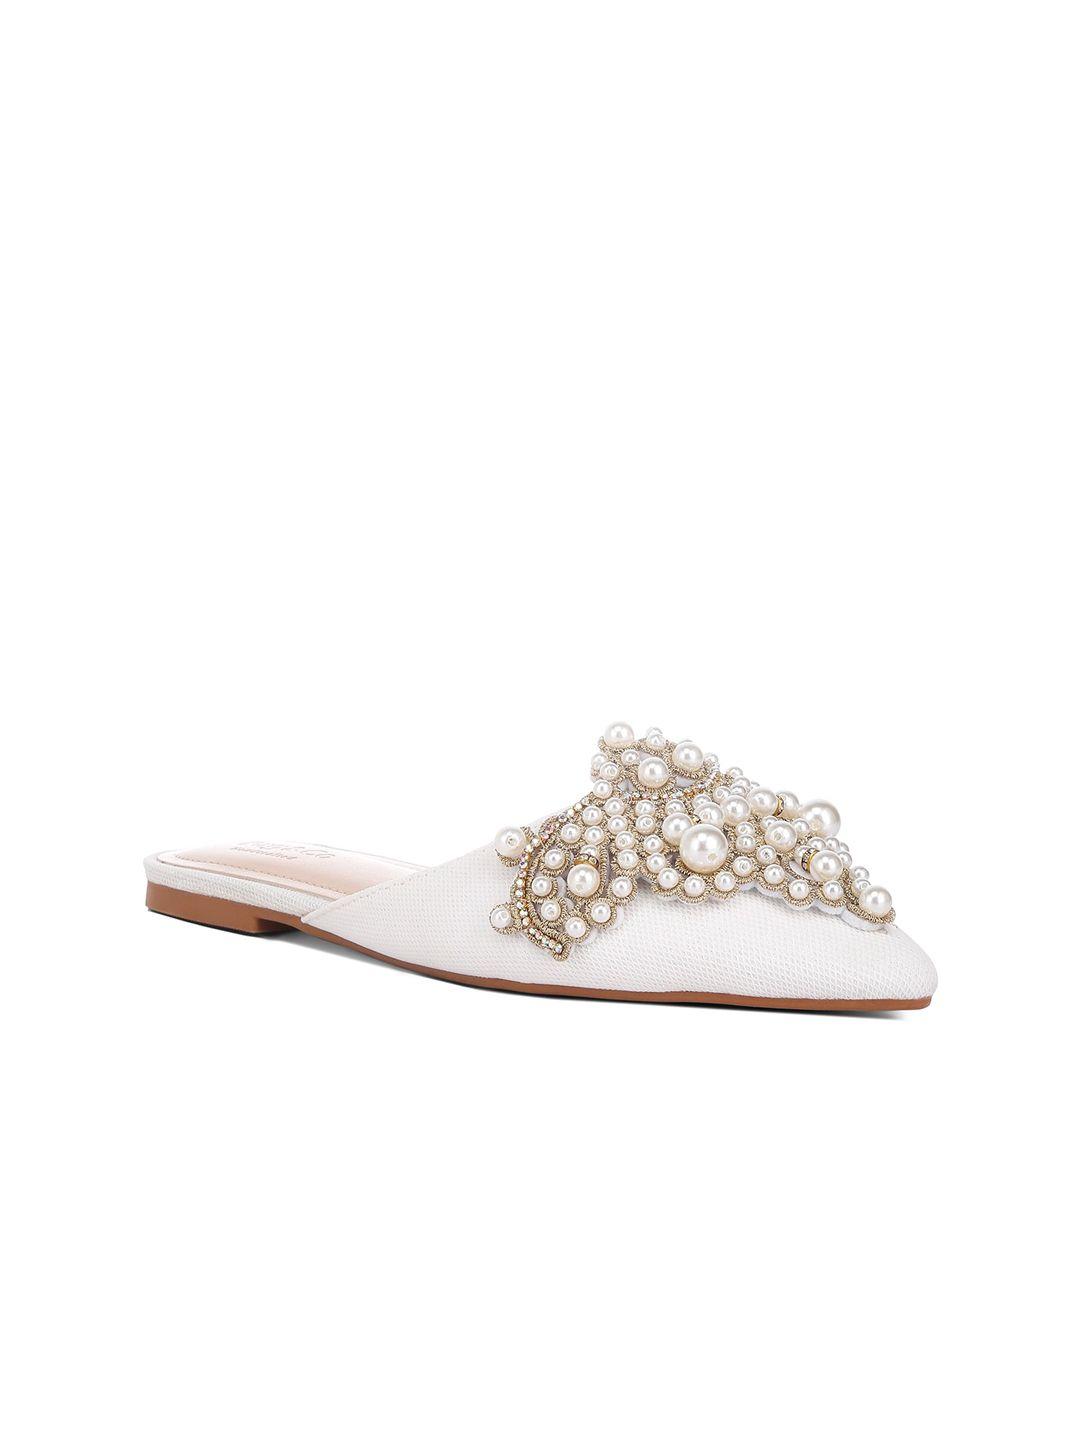 rag & co embellished pointed toe fabric party mules